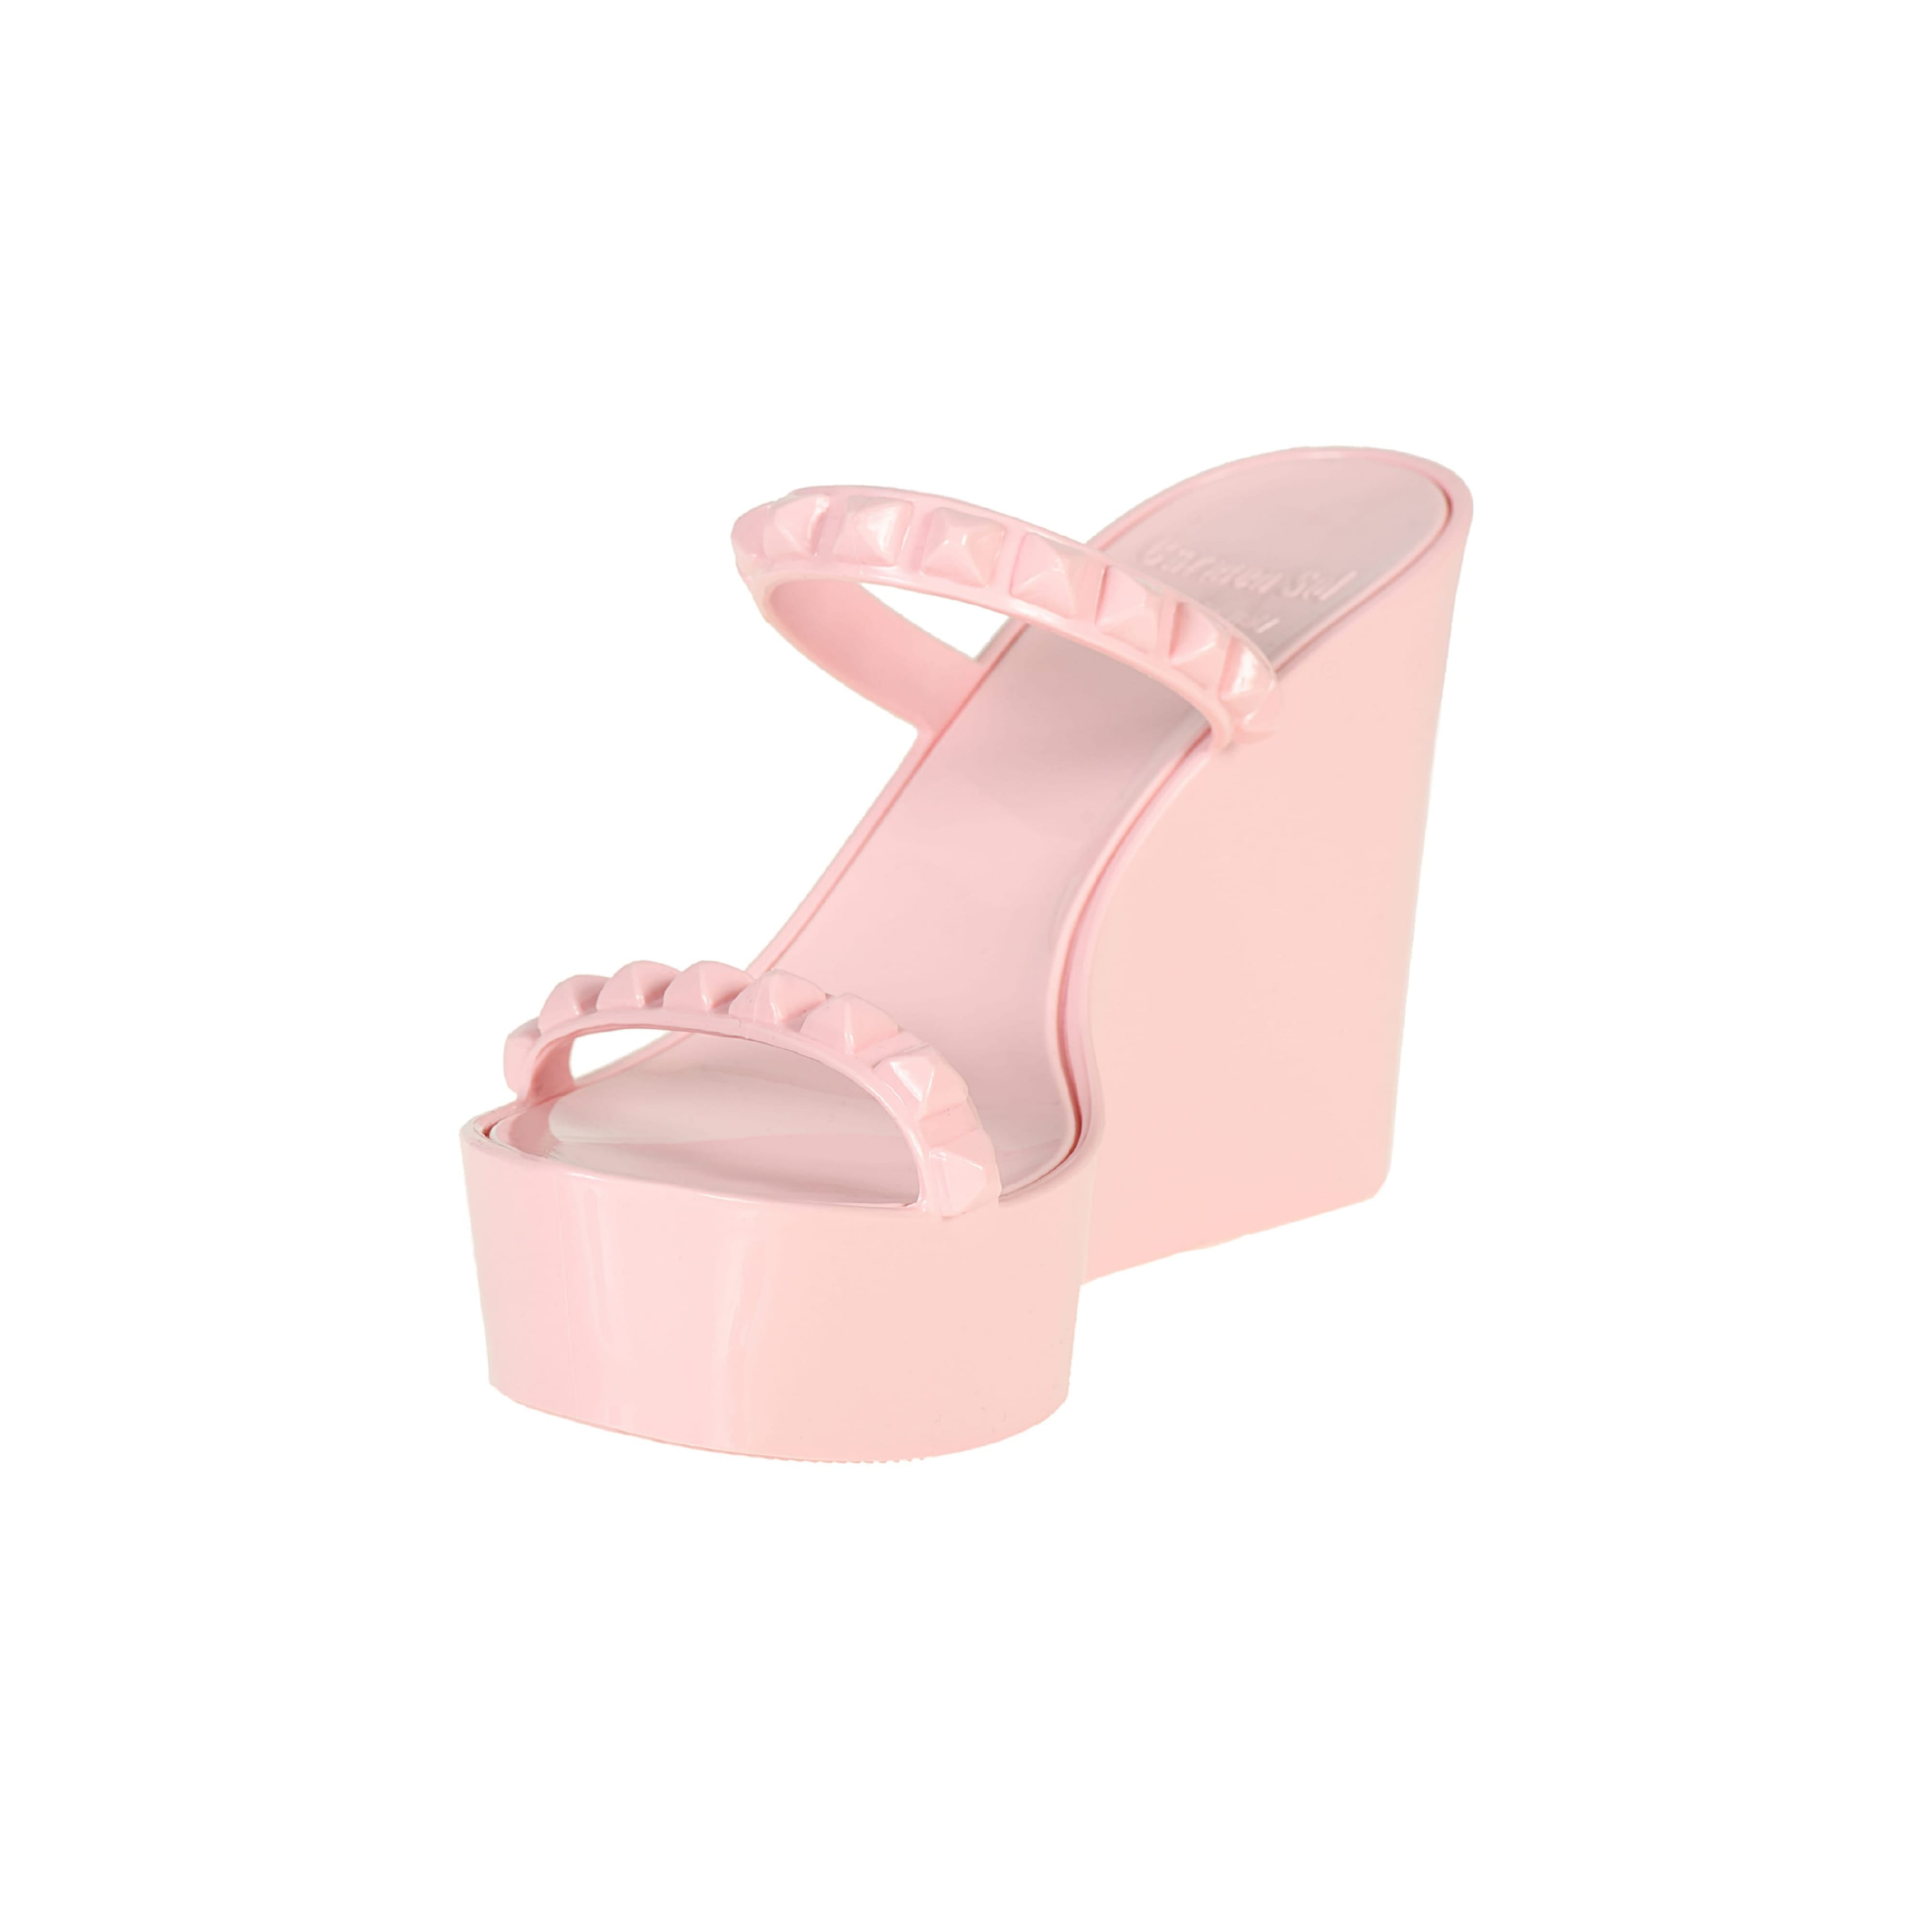 Best jelly shoes, Jelly wedge summer sandals, white sandals